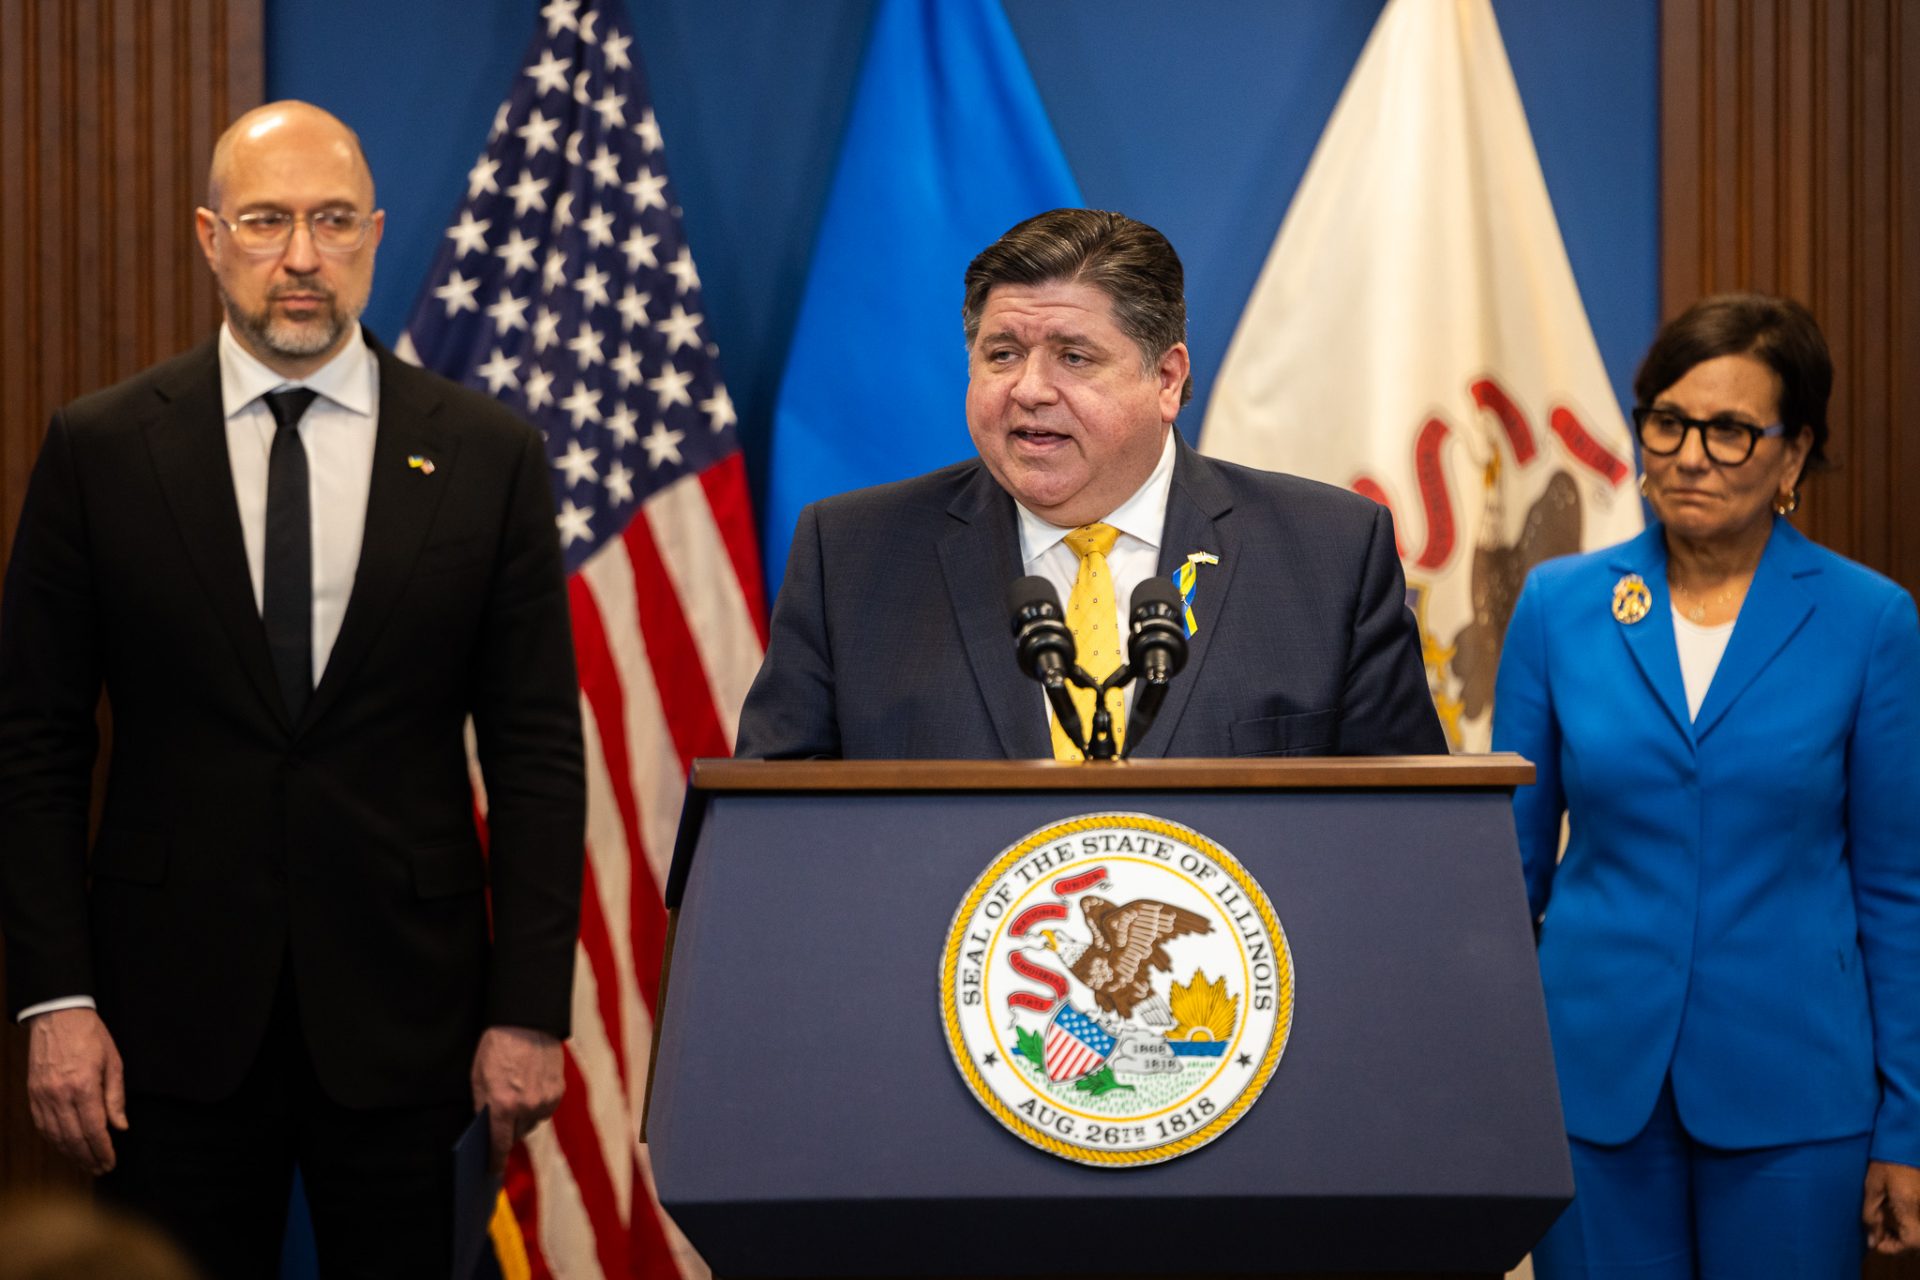 Pritzker supports the Ukrainian cause